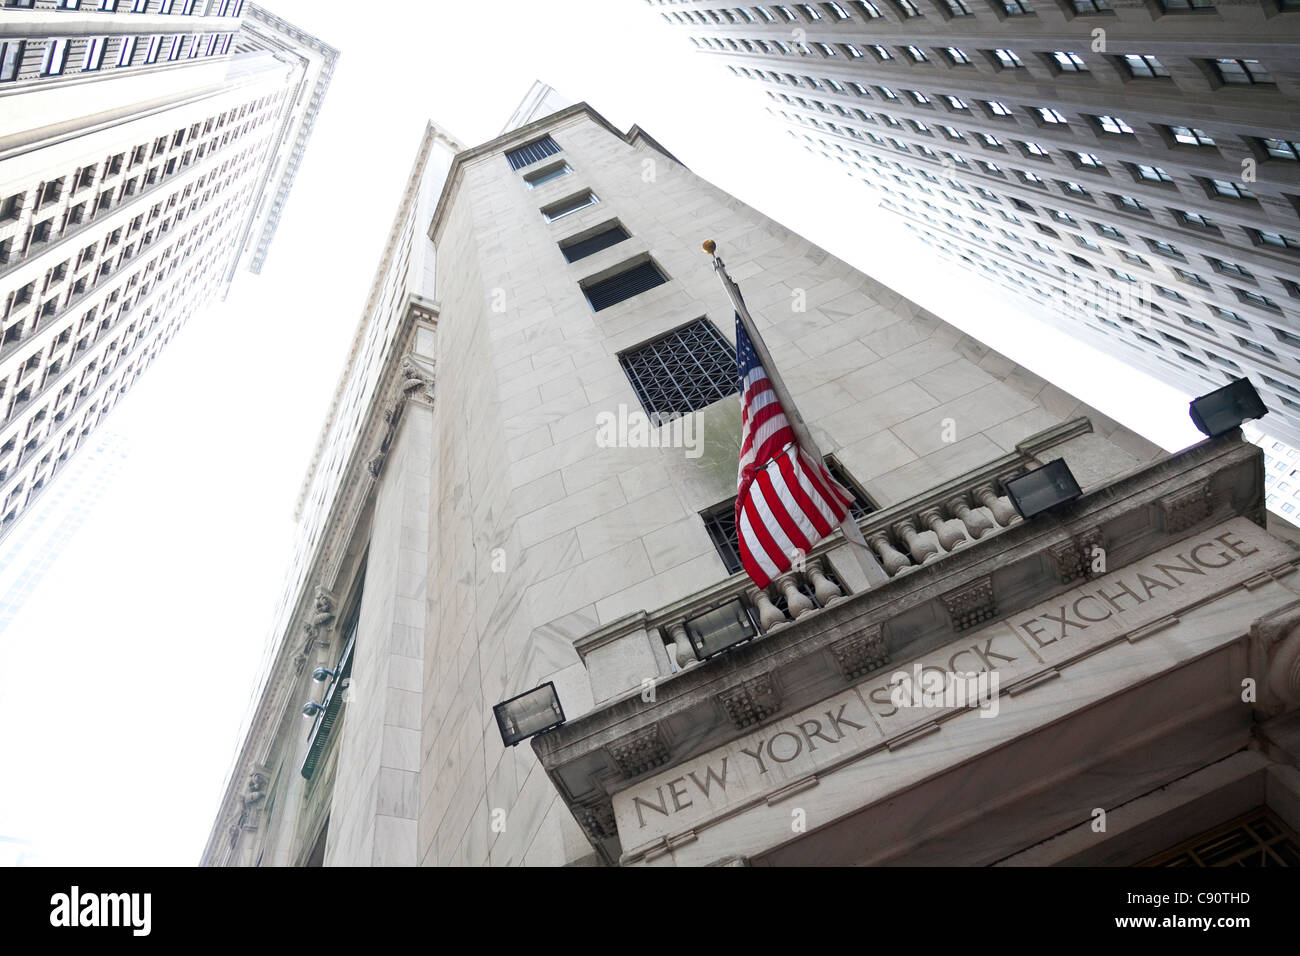 New York Stock Exchange architect George Browne Post center of the financial world Manhattan New York City United States of Amer Stock Photo